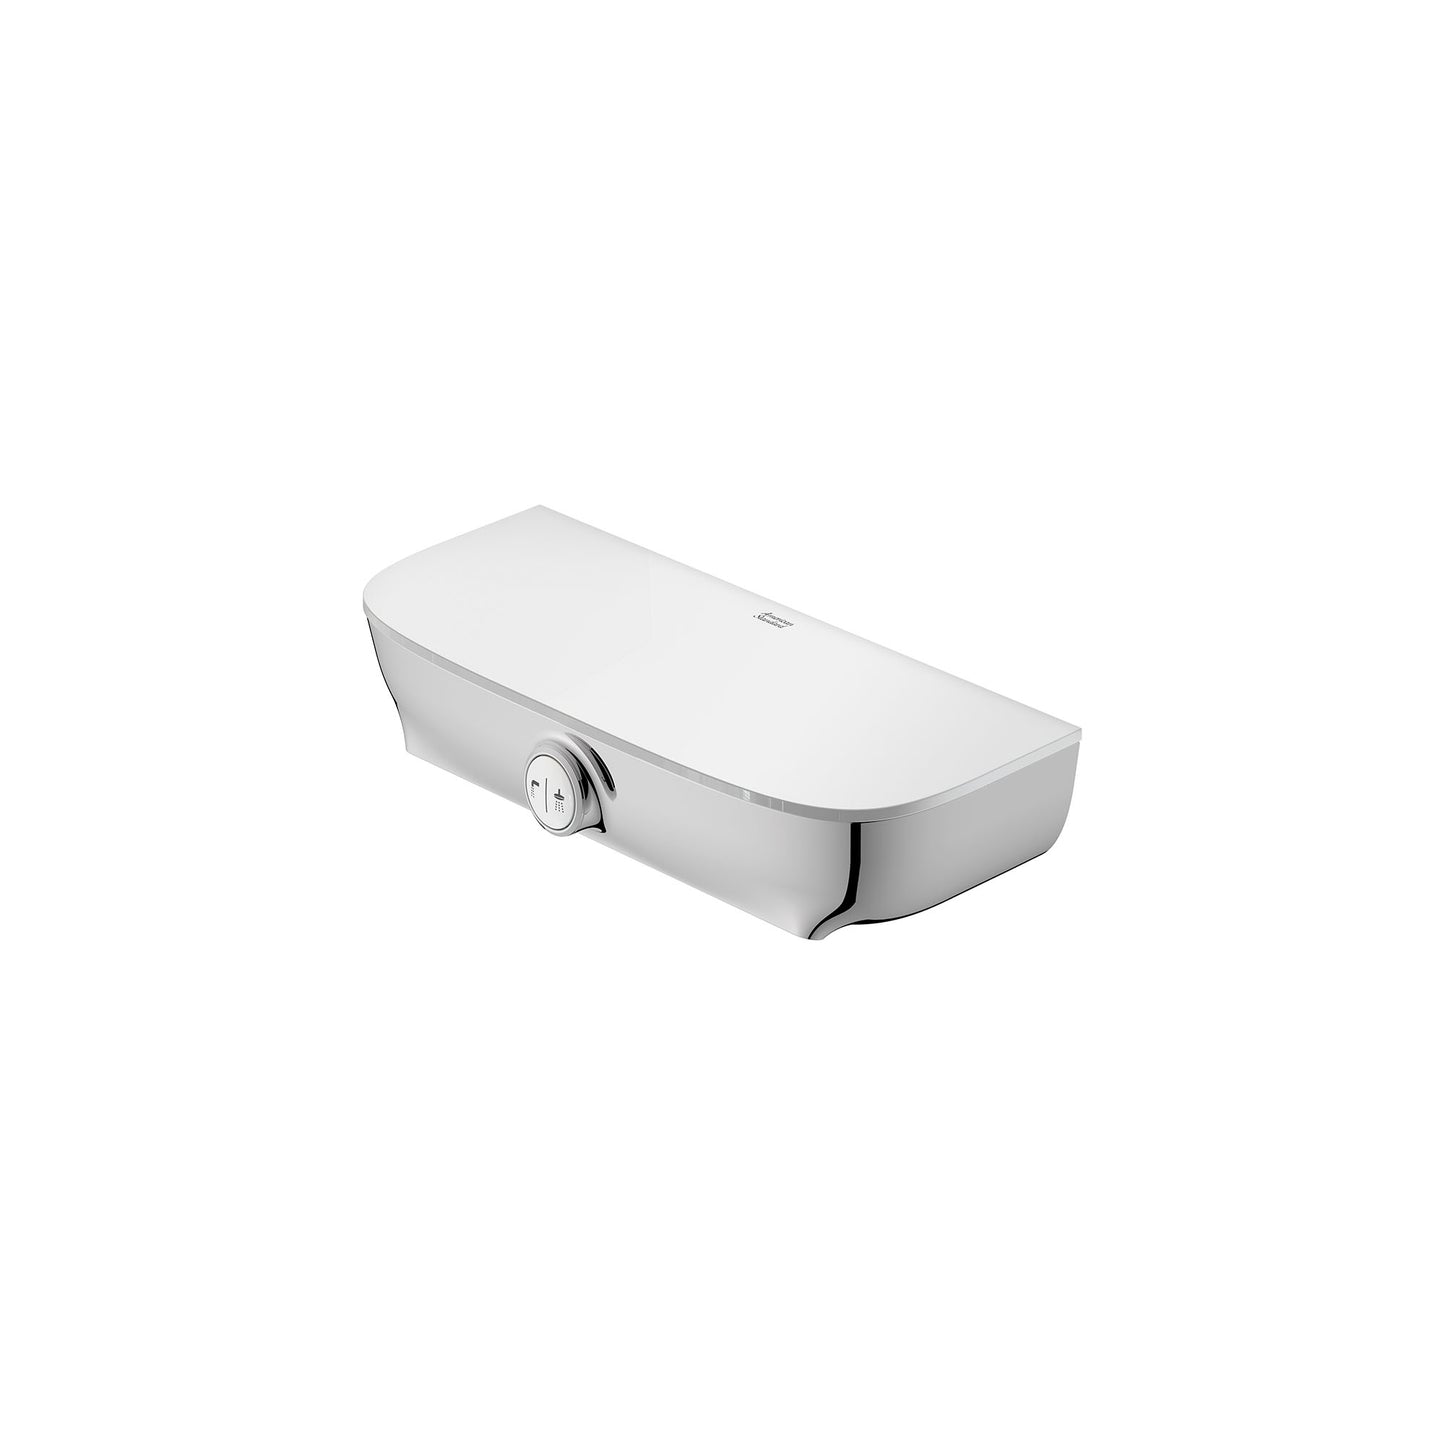 AMERICAN-STANDARD 8888116.002, Aspirations Diverting Waterfall Tub Spout in Chrome